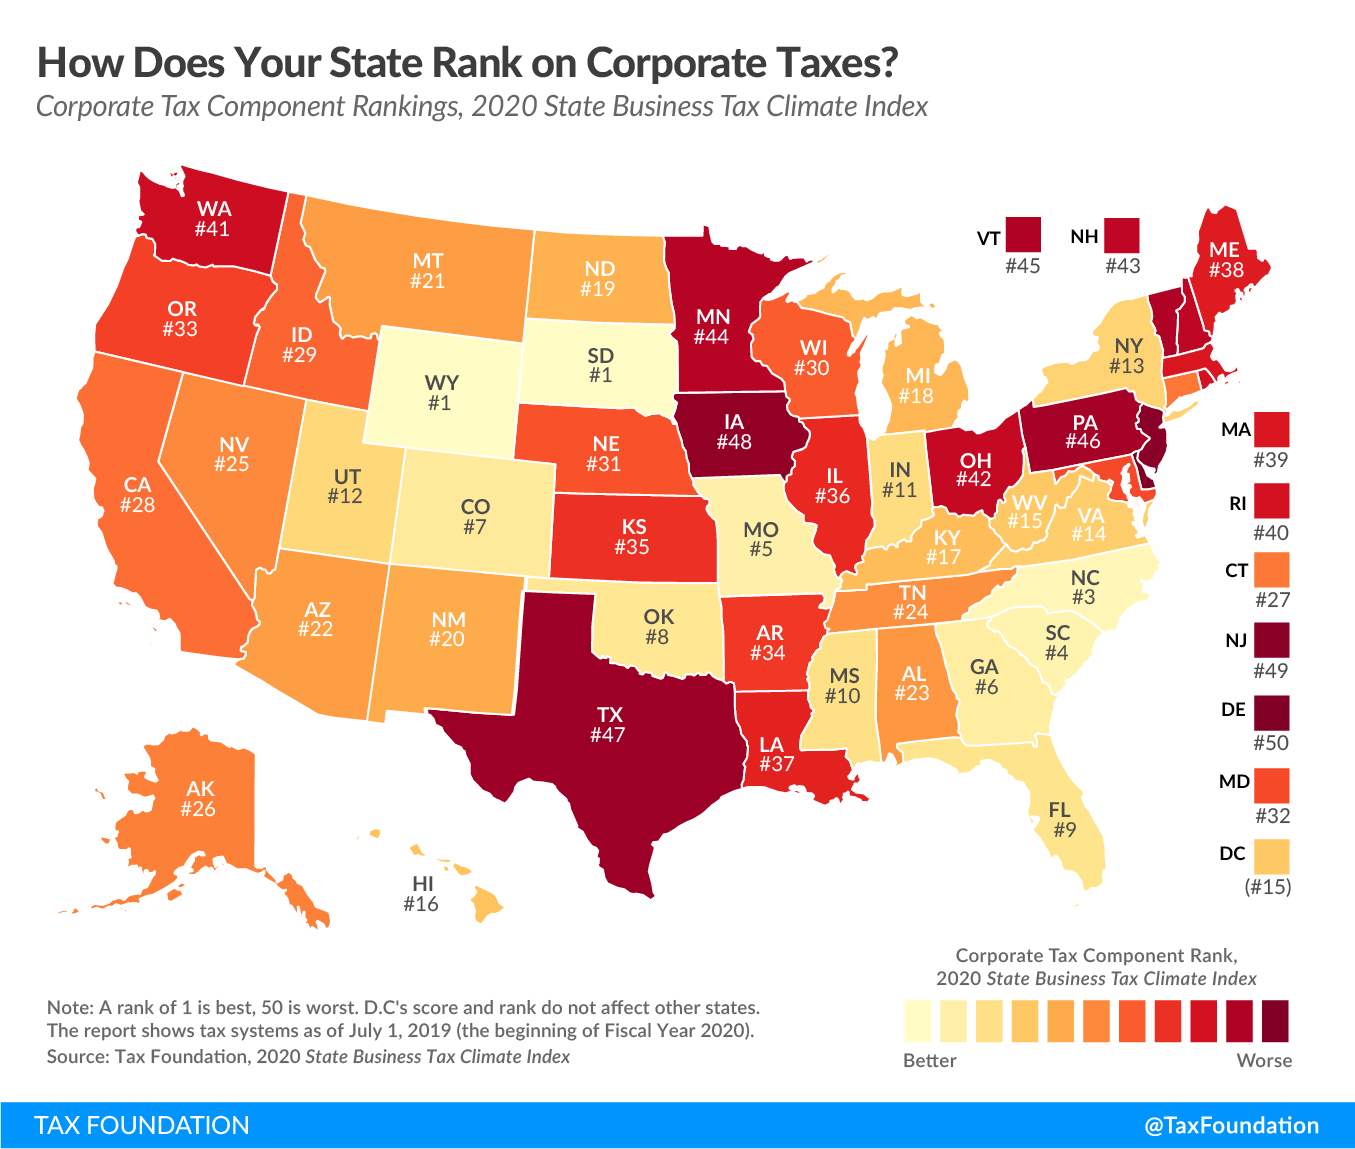 worst corporate tax codes in the U.S. worst corporate tax codes in the country. worst state corporate tax codes in the country, best corporate tax codes in the country, best state corporate tax systems in the country, worst state business tax codes, best state business tax codes, best business tax codes, worst business tax codes